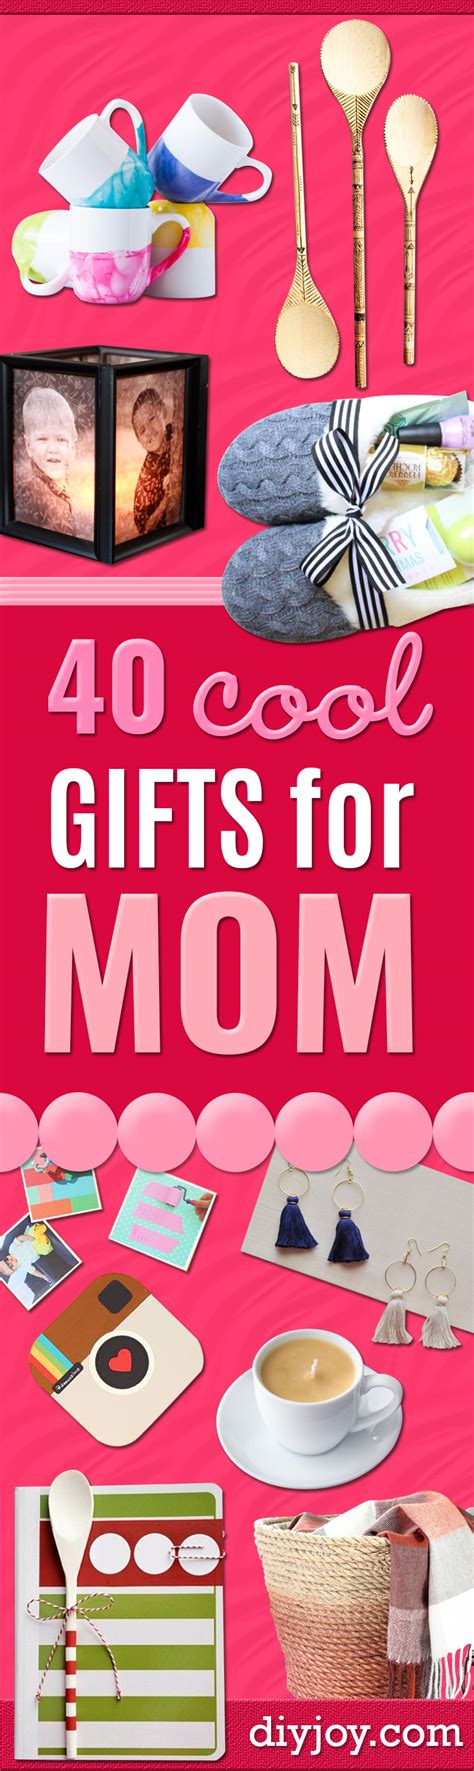 Jul 14, 2015 · whether you're traveling by plane, train, or automobile, these healthy and simple snacks are all easy to store and carry, packed with healthy nutrients, and tempting even for picky eaters. 40 Coolest Gifts To Make for Mom